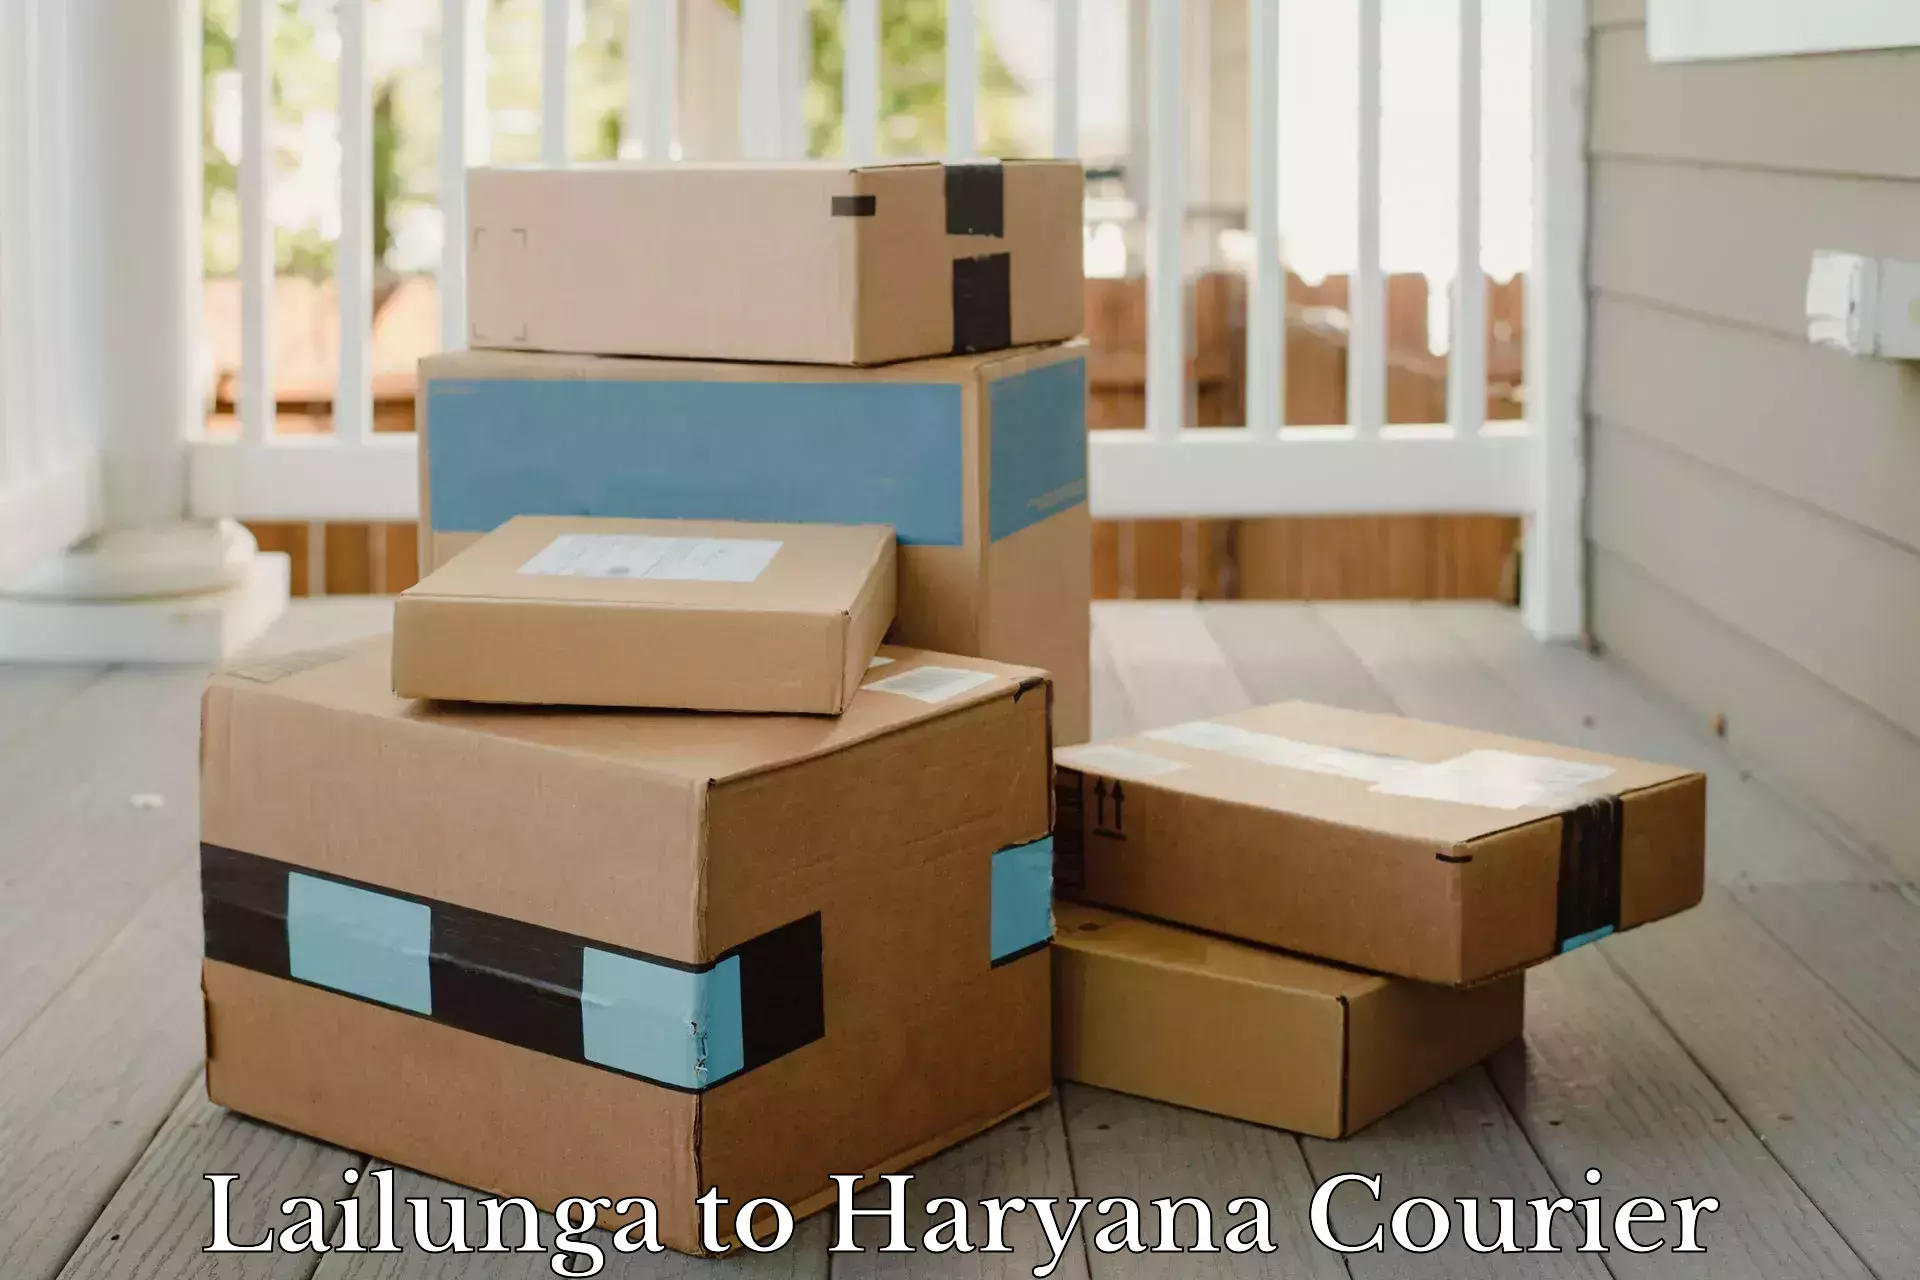 Express delivery network Lailunga to Gurgaon